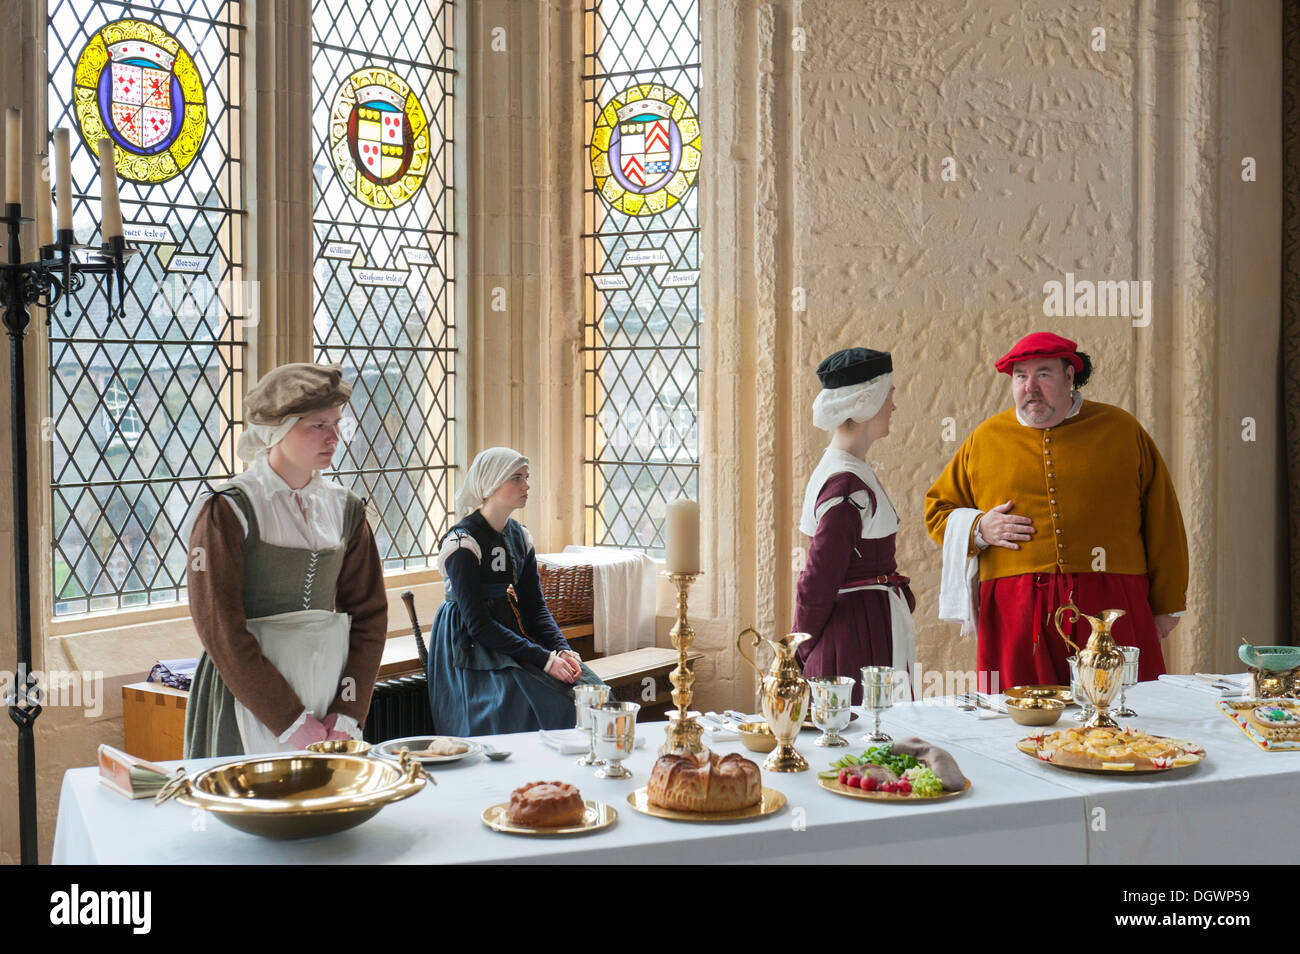 Drama, set table, four people wearing medieval clothes, Stirling Castle Palace, Stirling, Scotland, United Kingdom Stock Photo